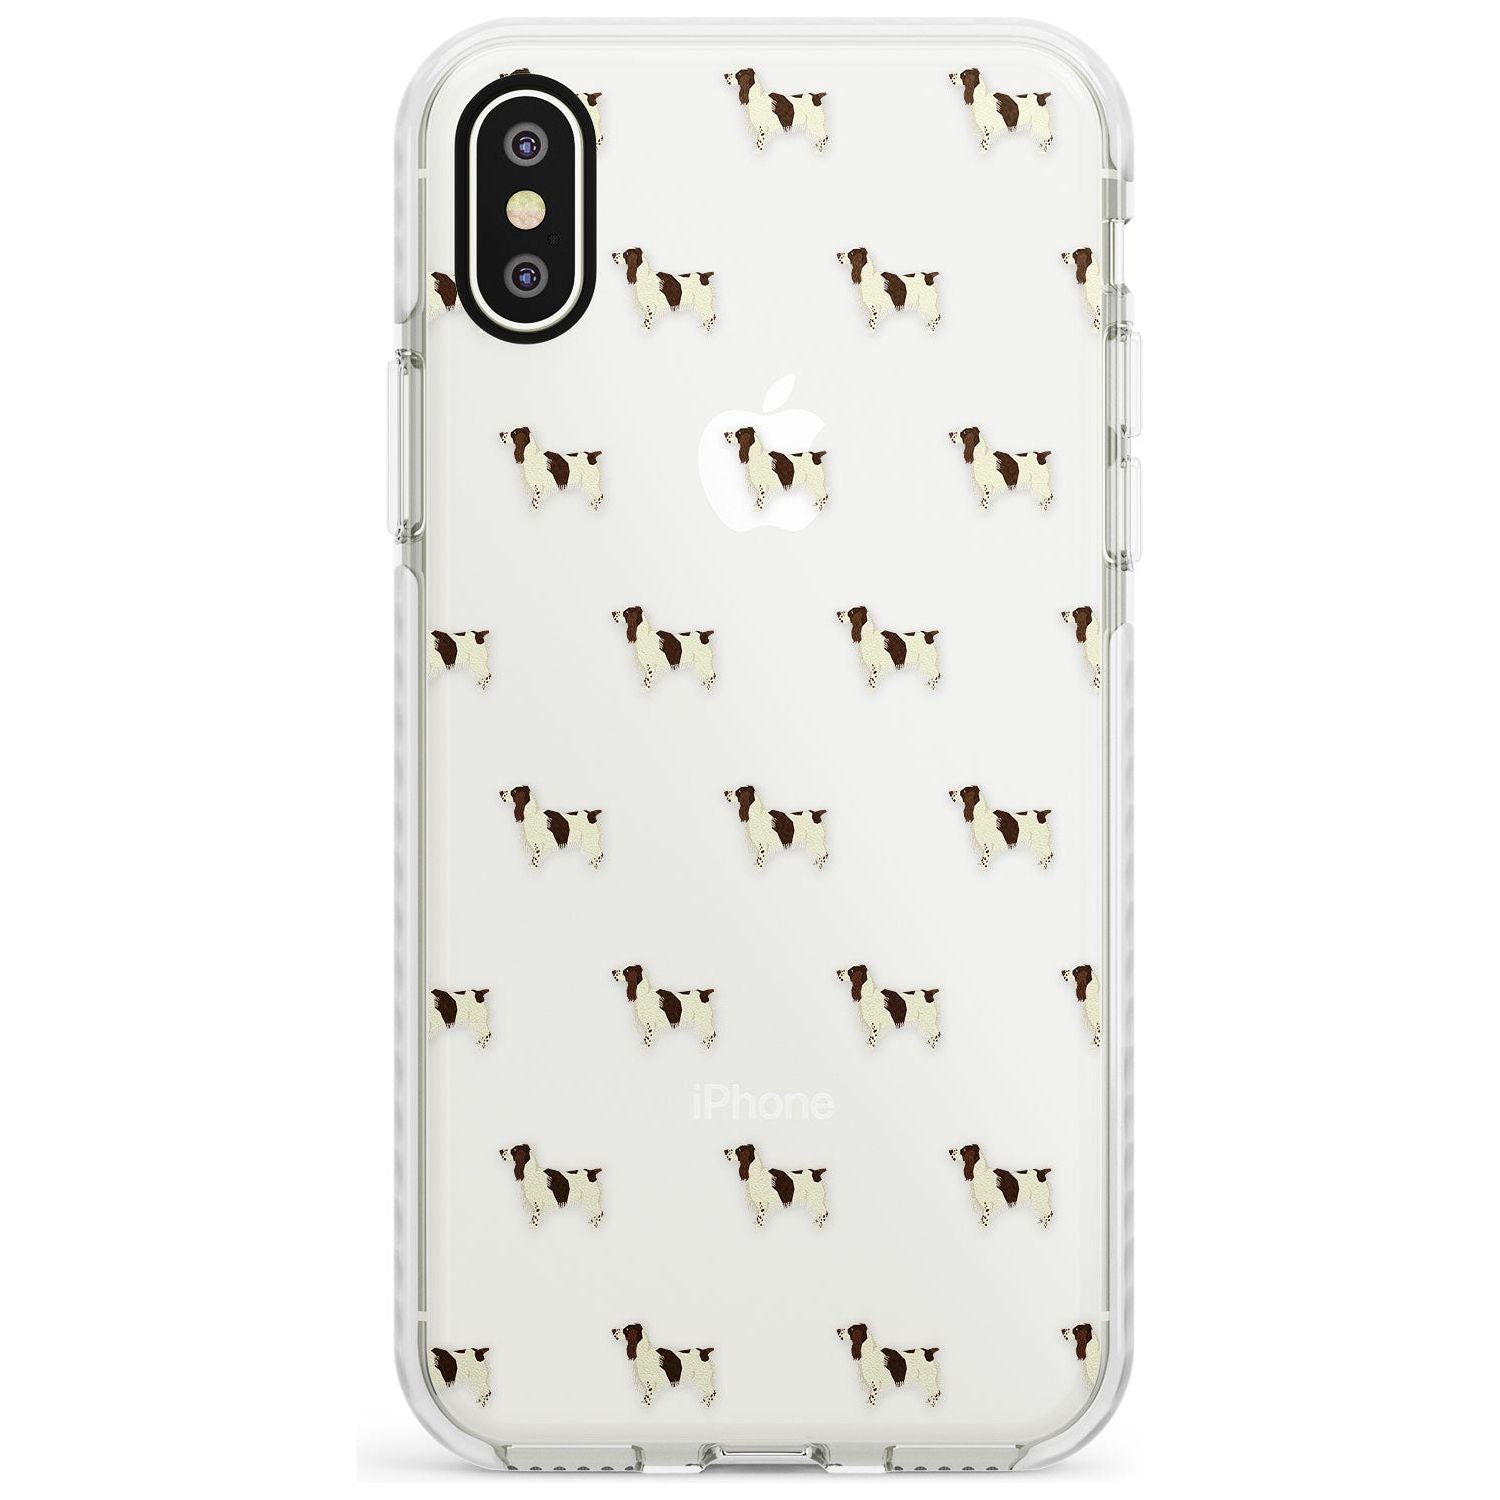 English Springer Spaniel Dog Pattern Clear Impact Phone Case for iPhone X XS Max XR